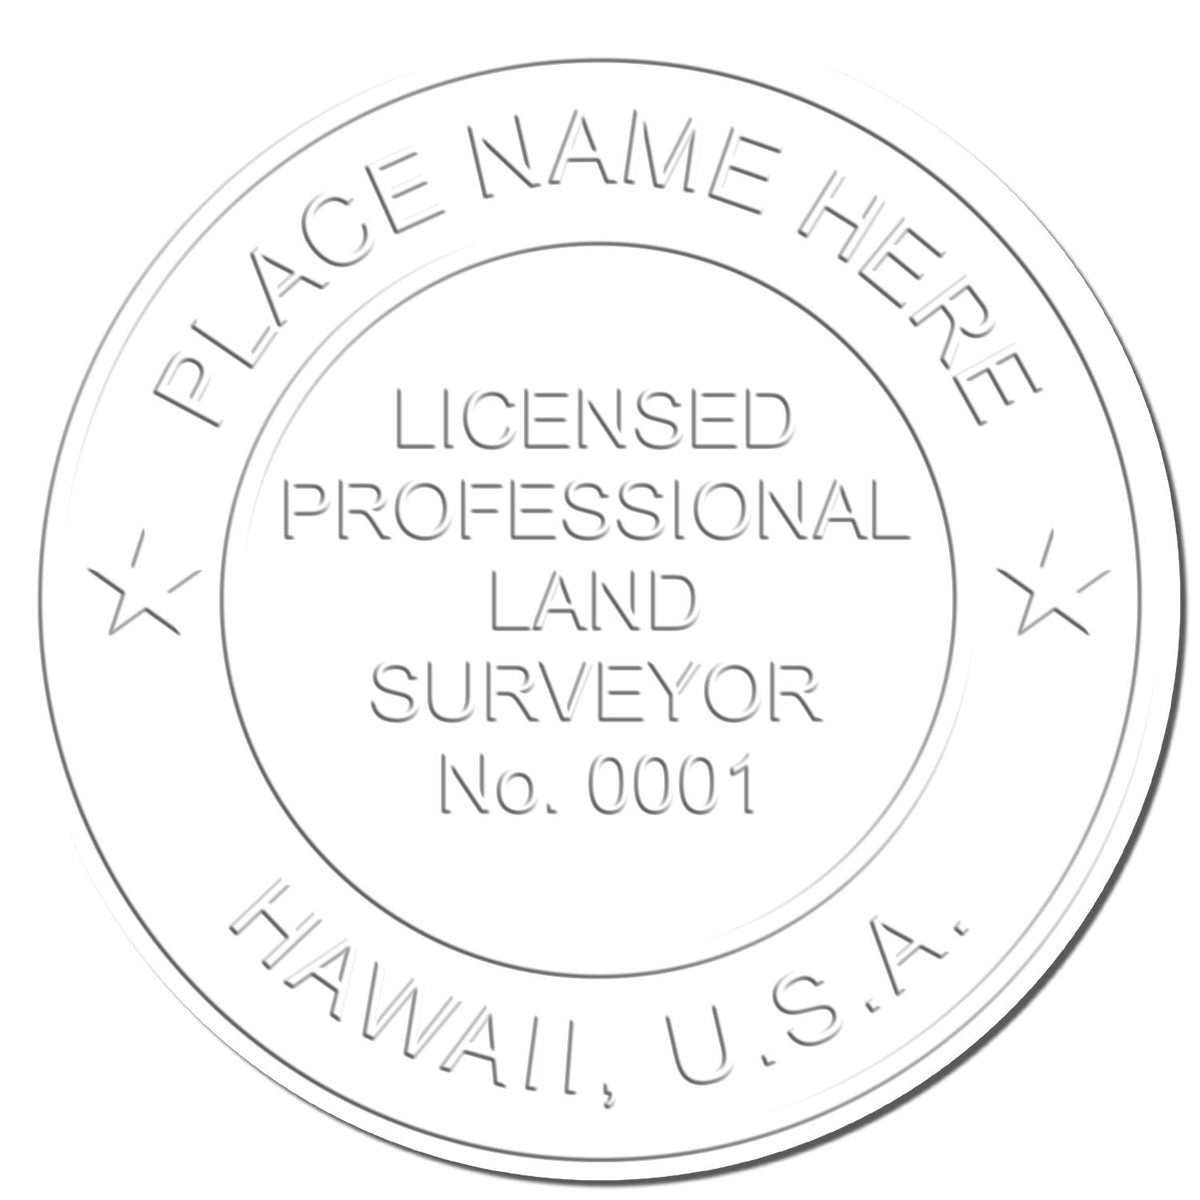 This paper is stamped with a sample imprint of the Gift Hawaii Land Surveyor Seal, signifying its quality and reliability.